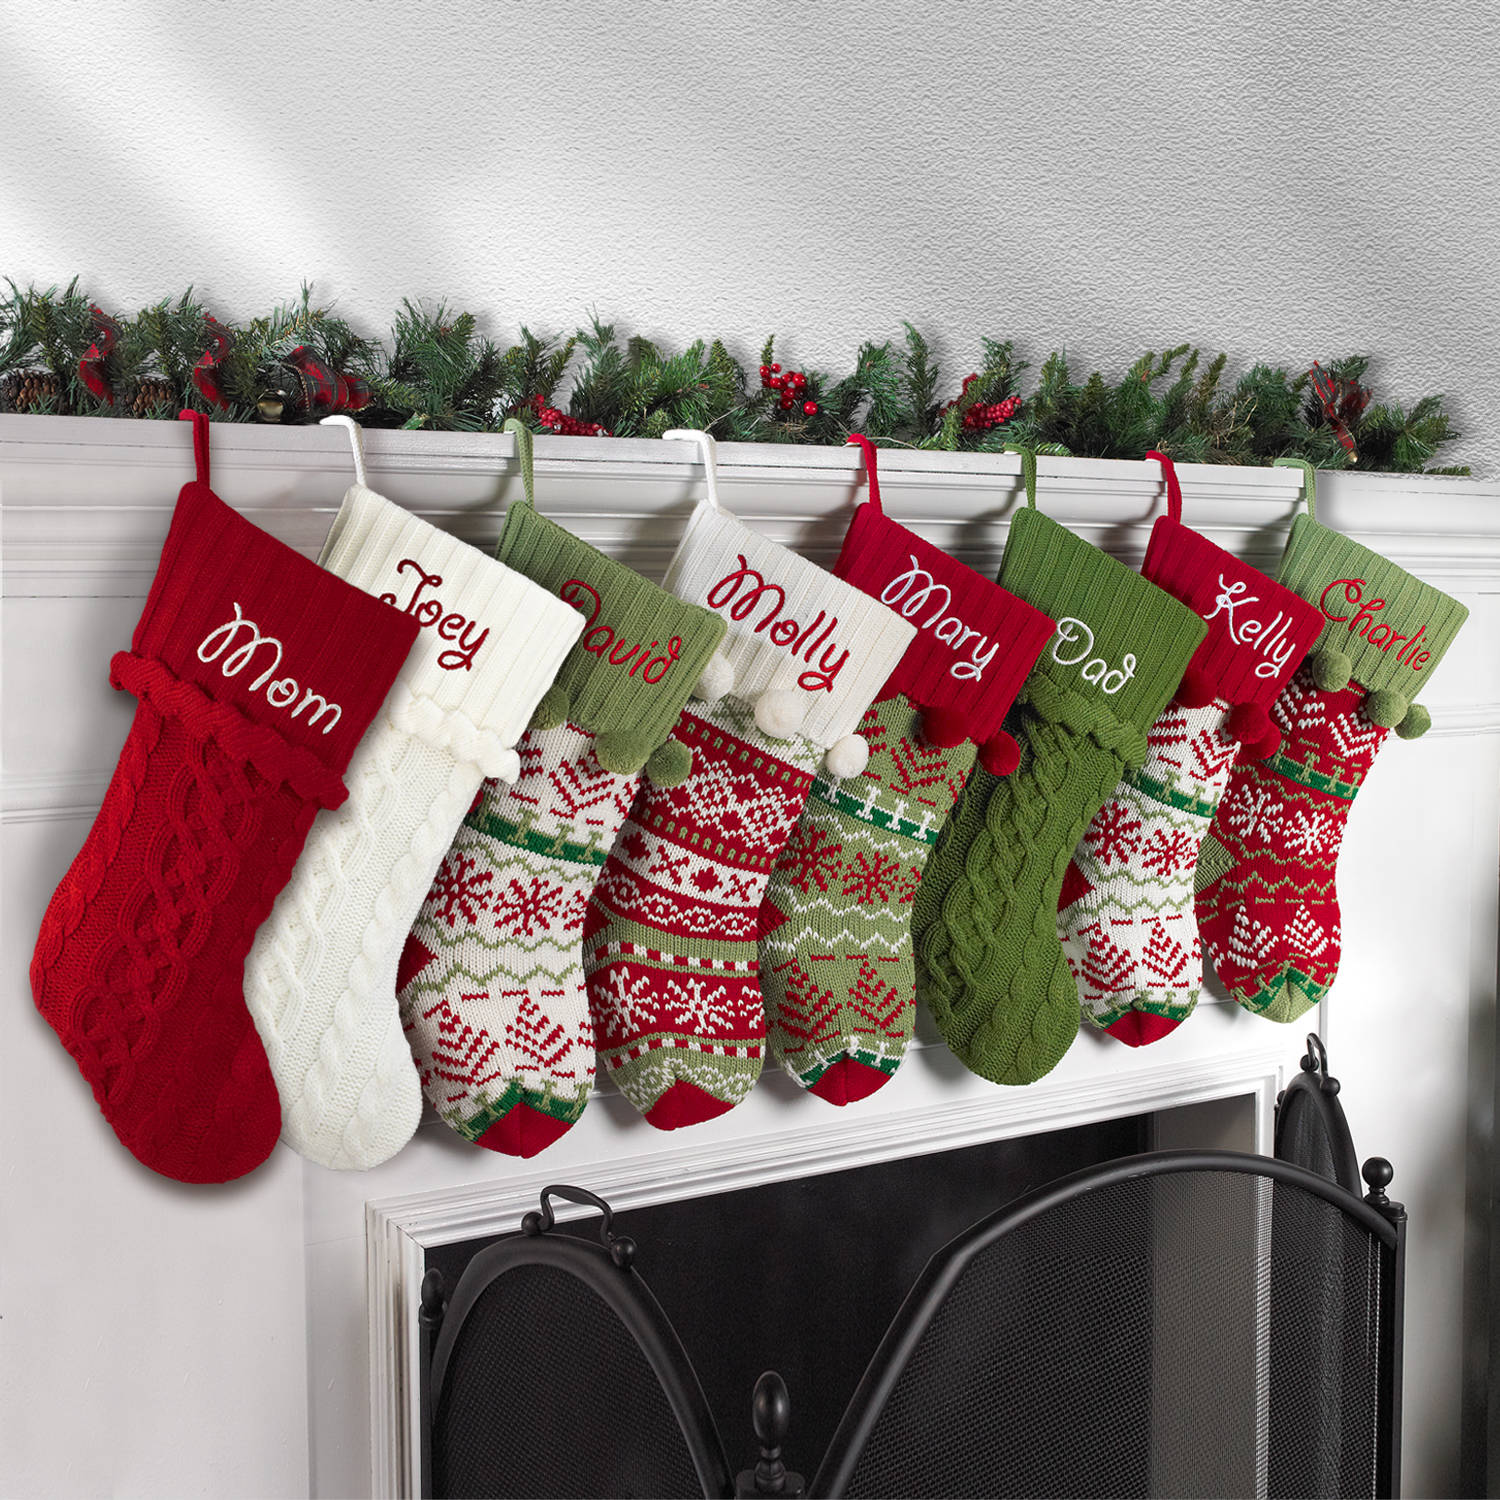 Using kit to knit christmas stockings - cottageartcreations.com